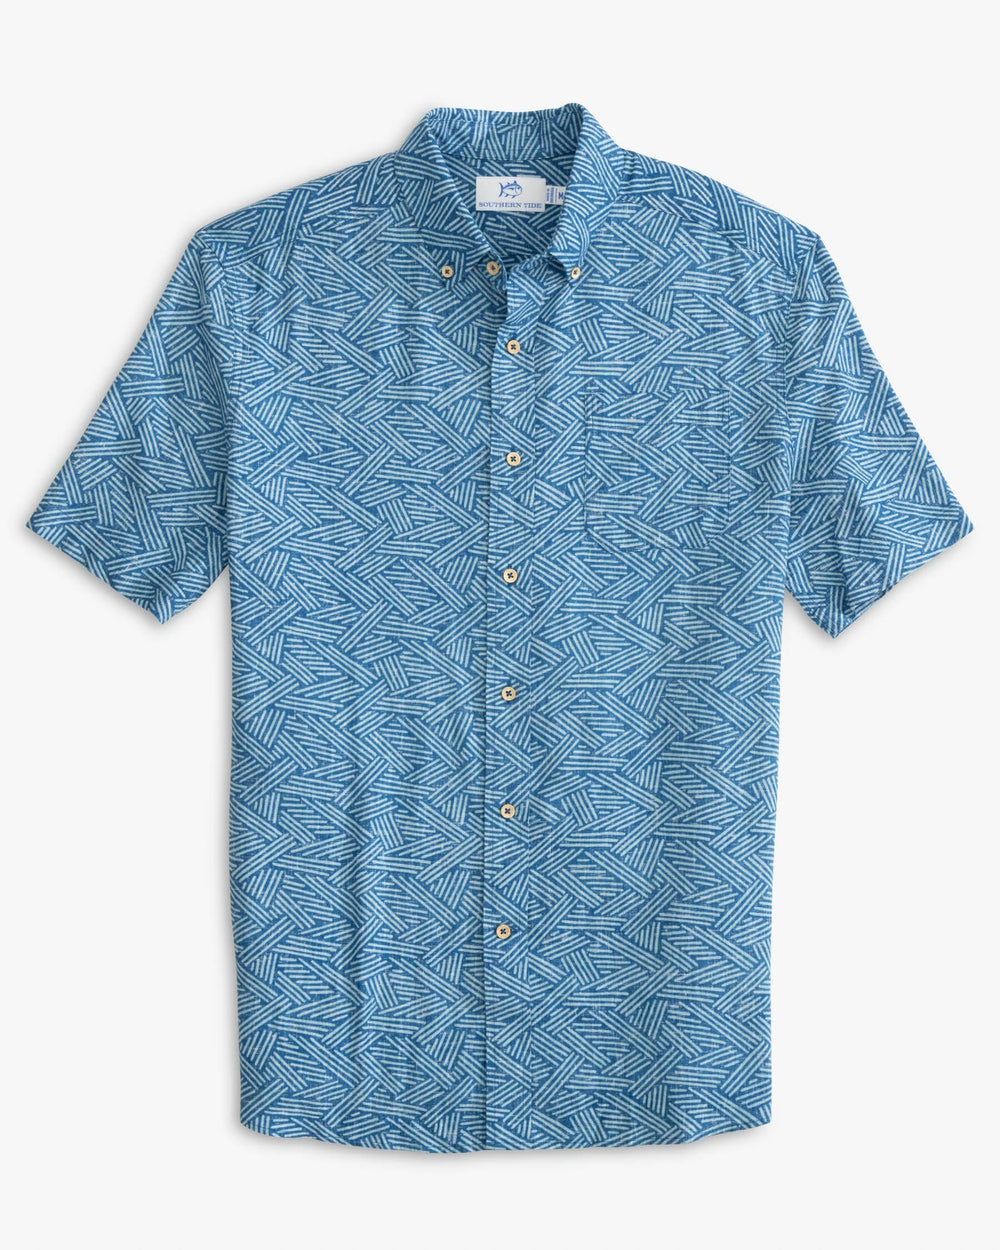 The front view of the Southern Tide Abstract Scribble Short Sleeve Button Down Shirt by Southern Tide - Atlantic Blue